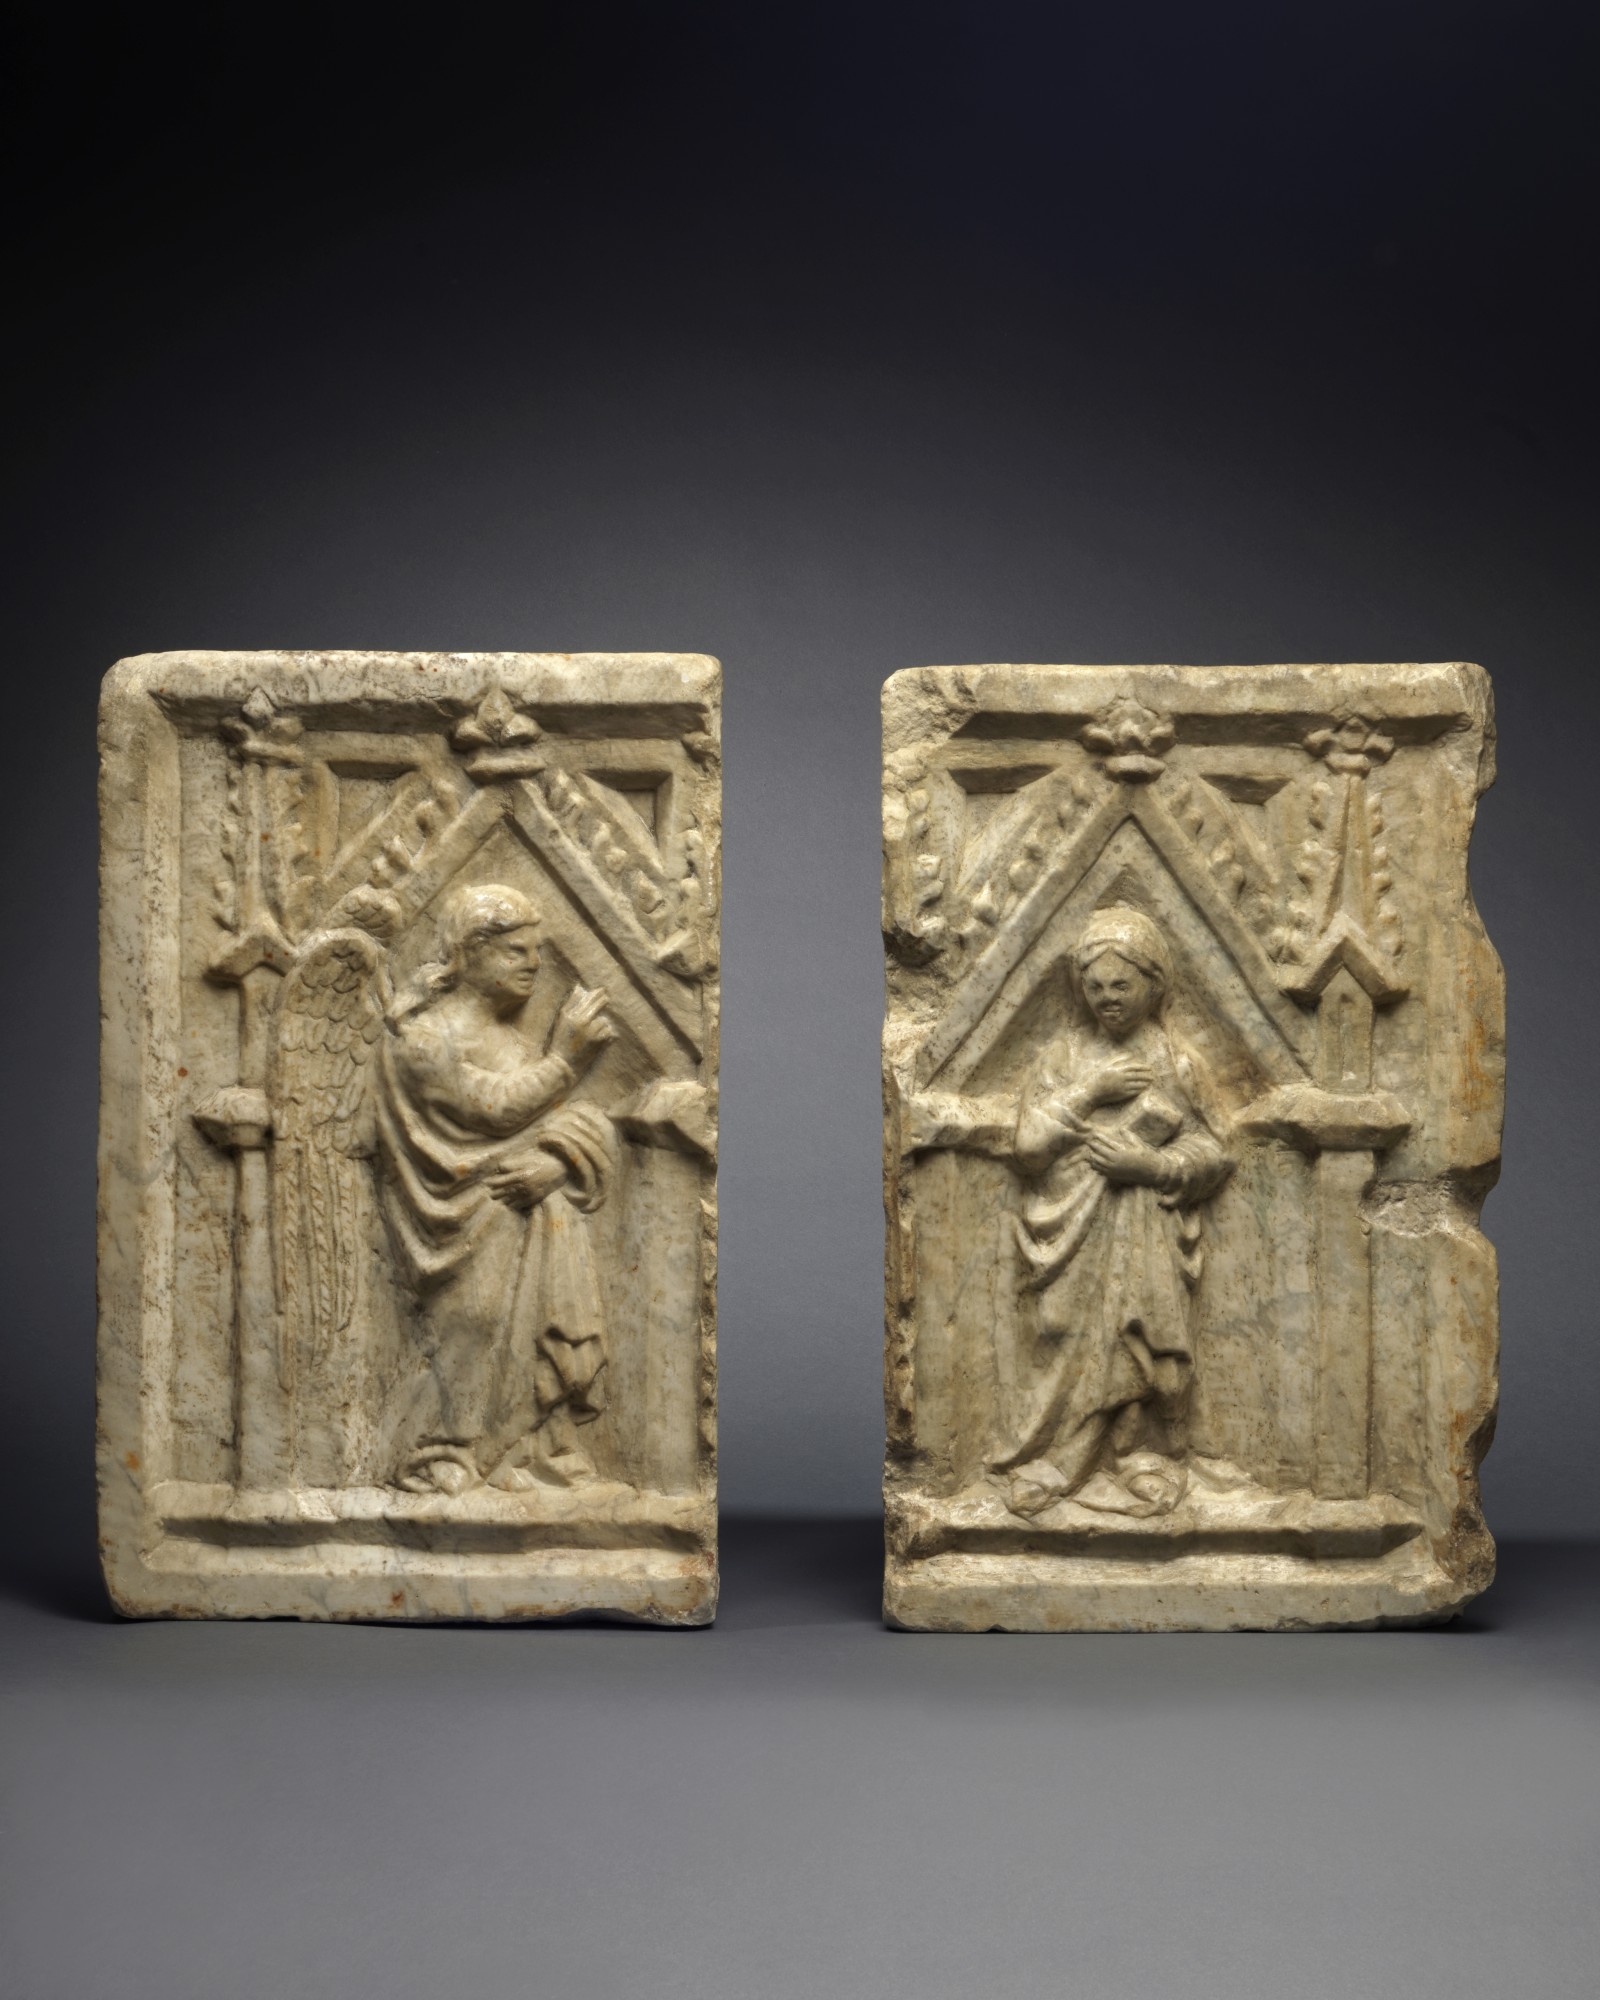 A Pair of Reliefs with the Angel Gabriel and Virgin of the Annunciation, Pisan Master, employee of L